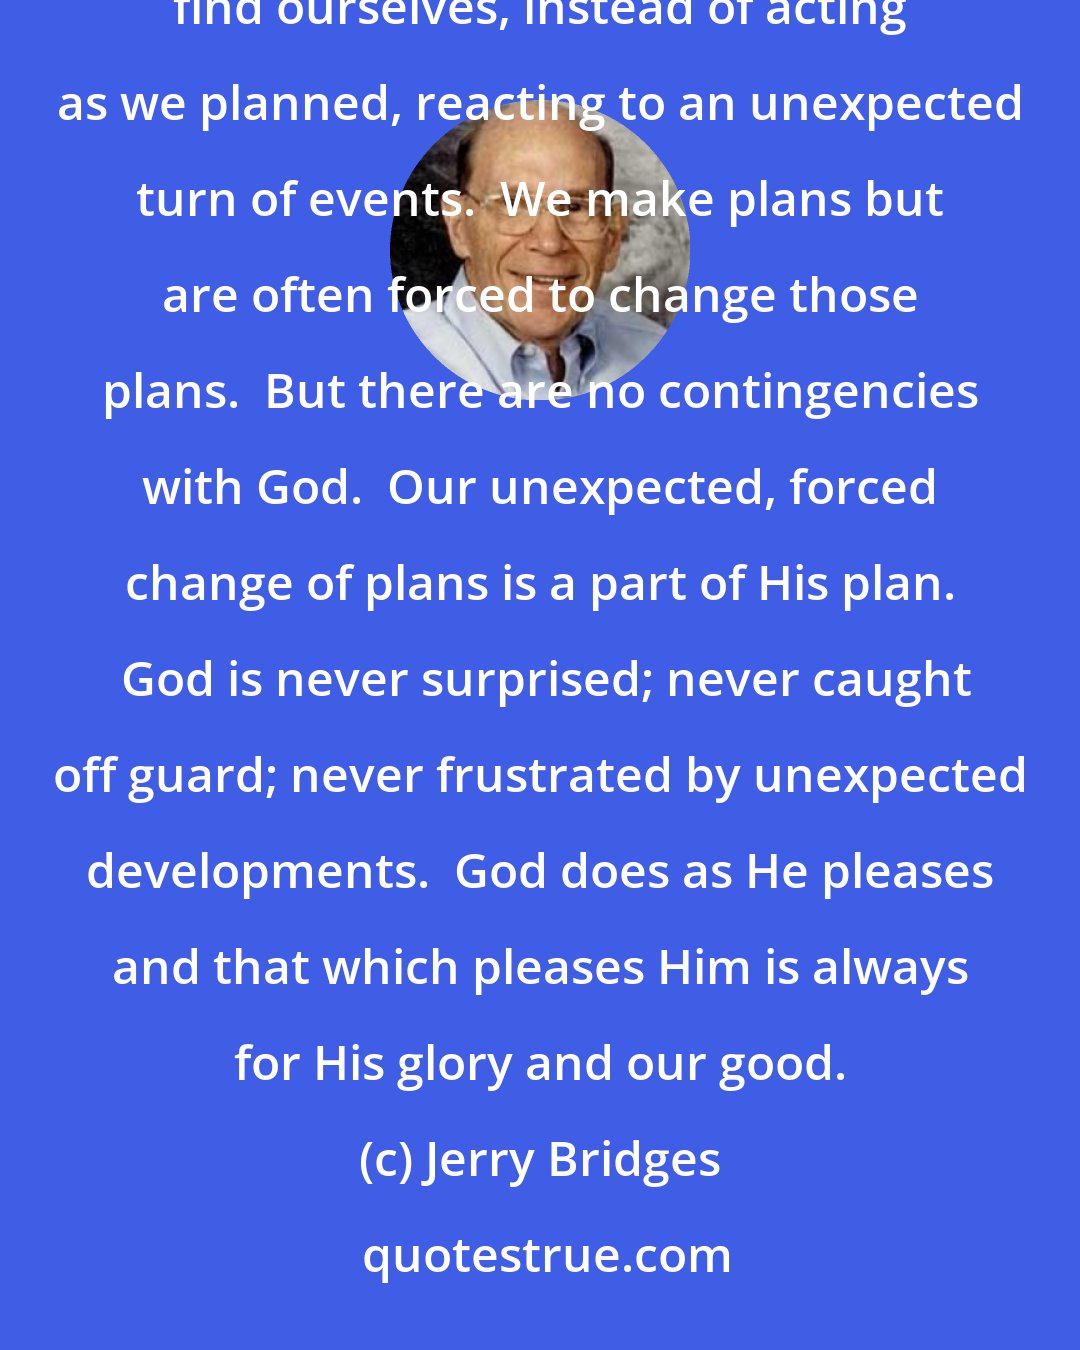 Jerry Bridges: From our limited vantage point, our lives are marked by an endless series of contingencies.  We frequently find ourselves, instead of acting as we planned, reacting to an unexpected turn of events.  We make plans but are often forced to change those plans.  But there are no contingencies with God.  Our unexpected, forced change of plans is a part of His plan.  God is never surprised; never caught off guard; never frustrated by unexpected developments.  God does as He pleases and that which pleases Him is always for His glory and our good.